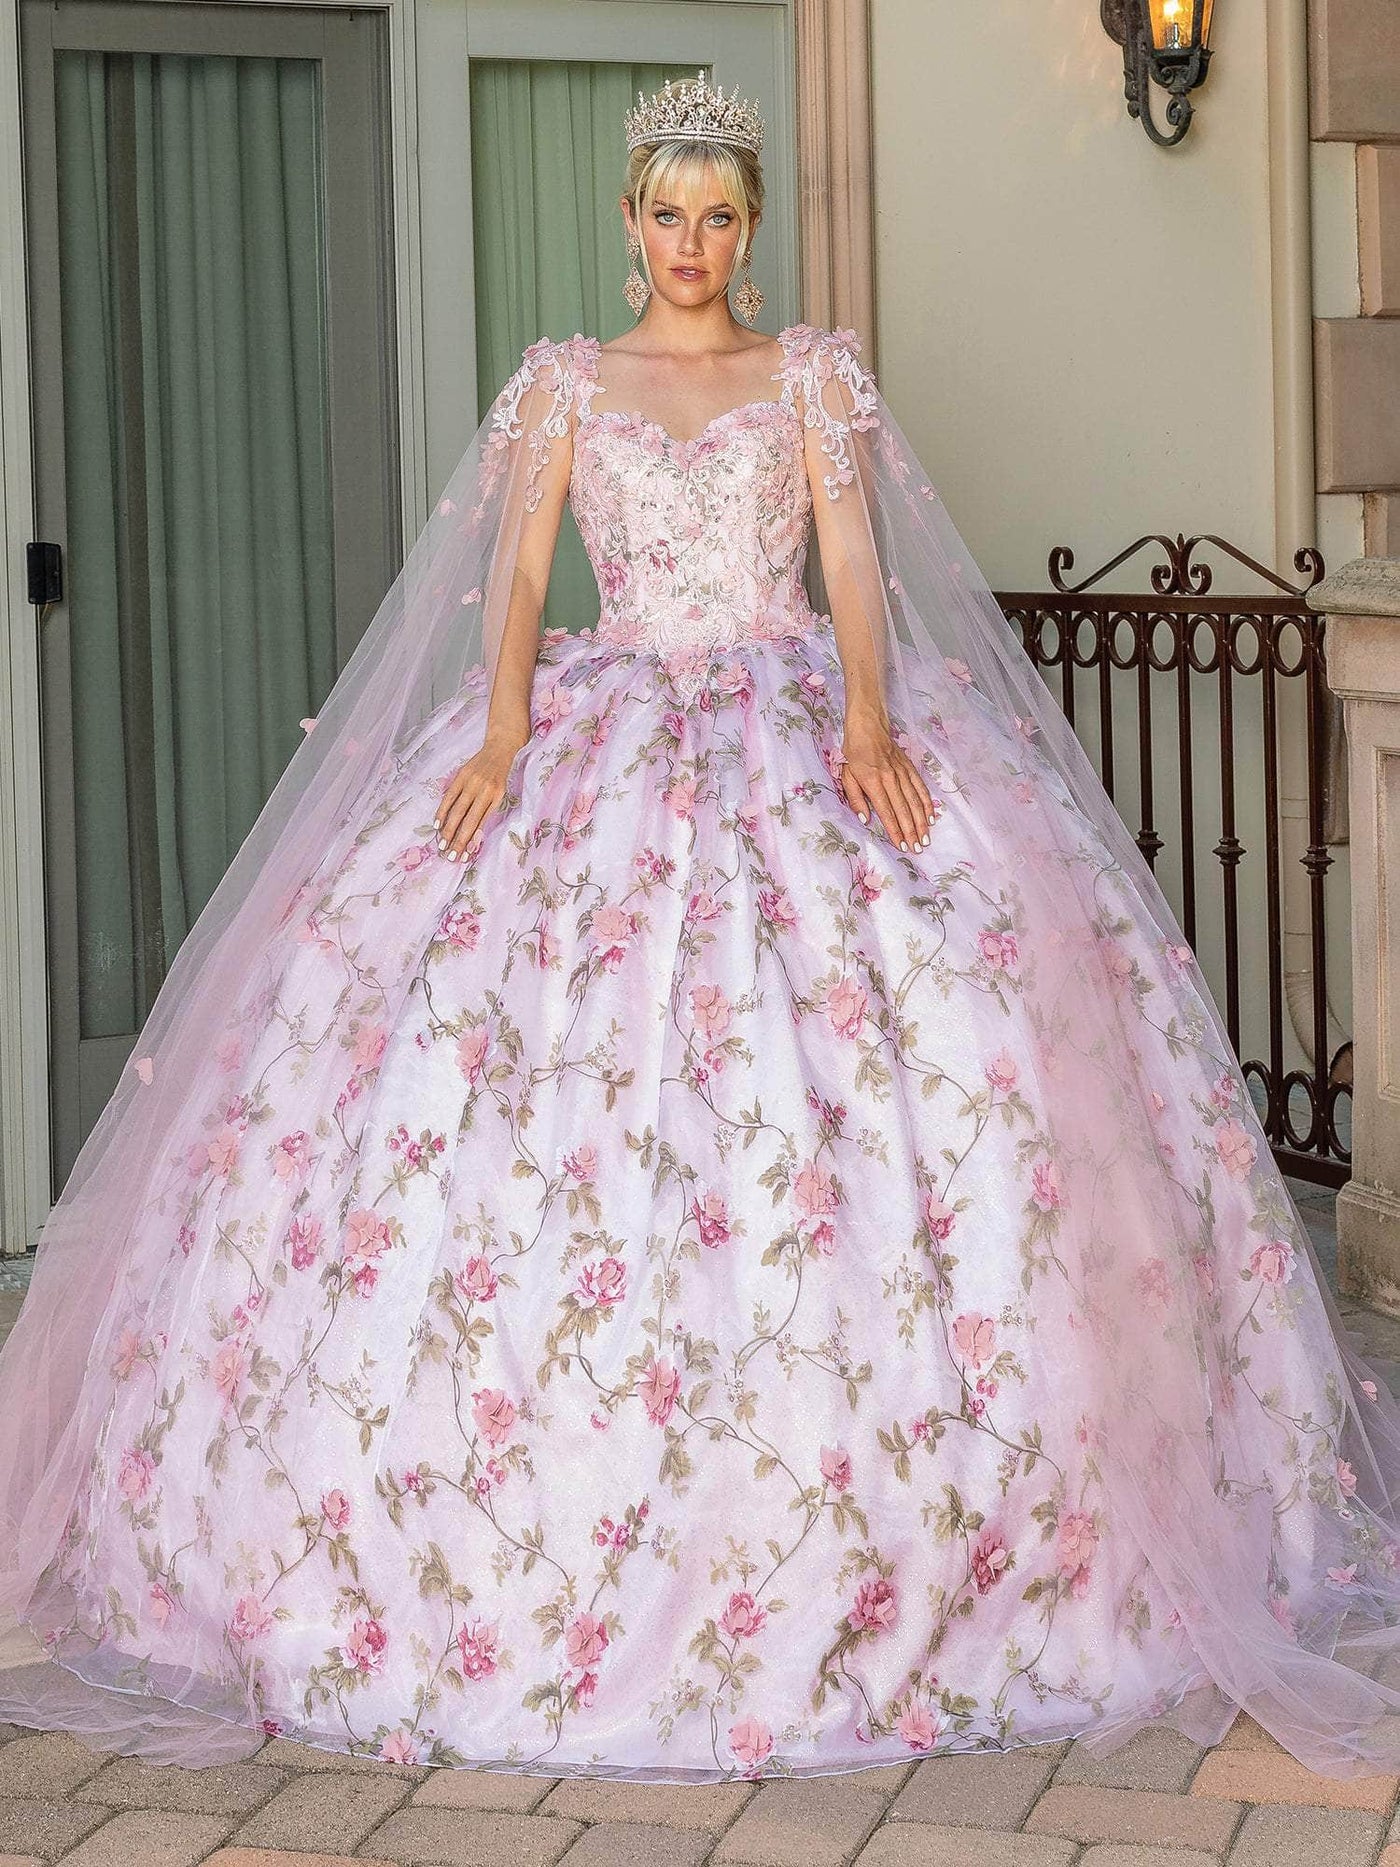 Dancing Queen 1715 - Sweetheart Floral Printed Ballgown Quinceanera Dresses